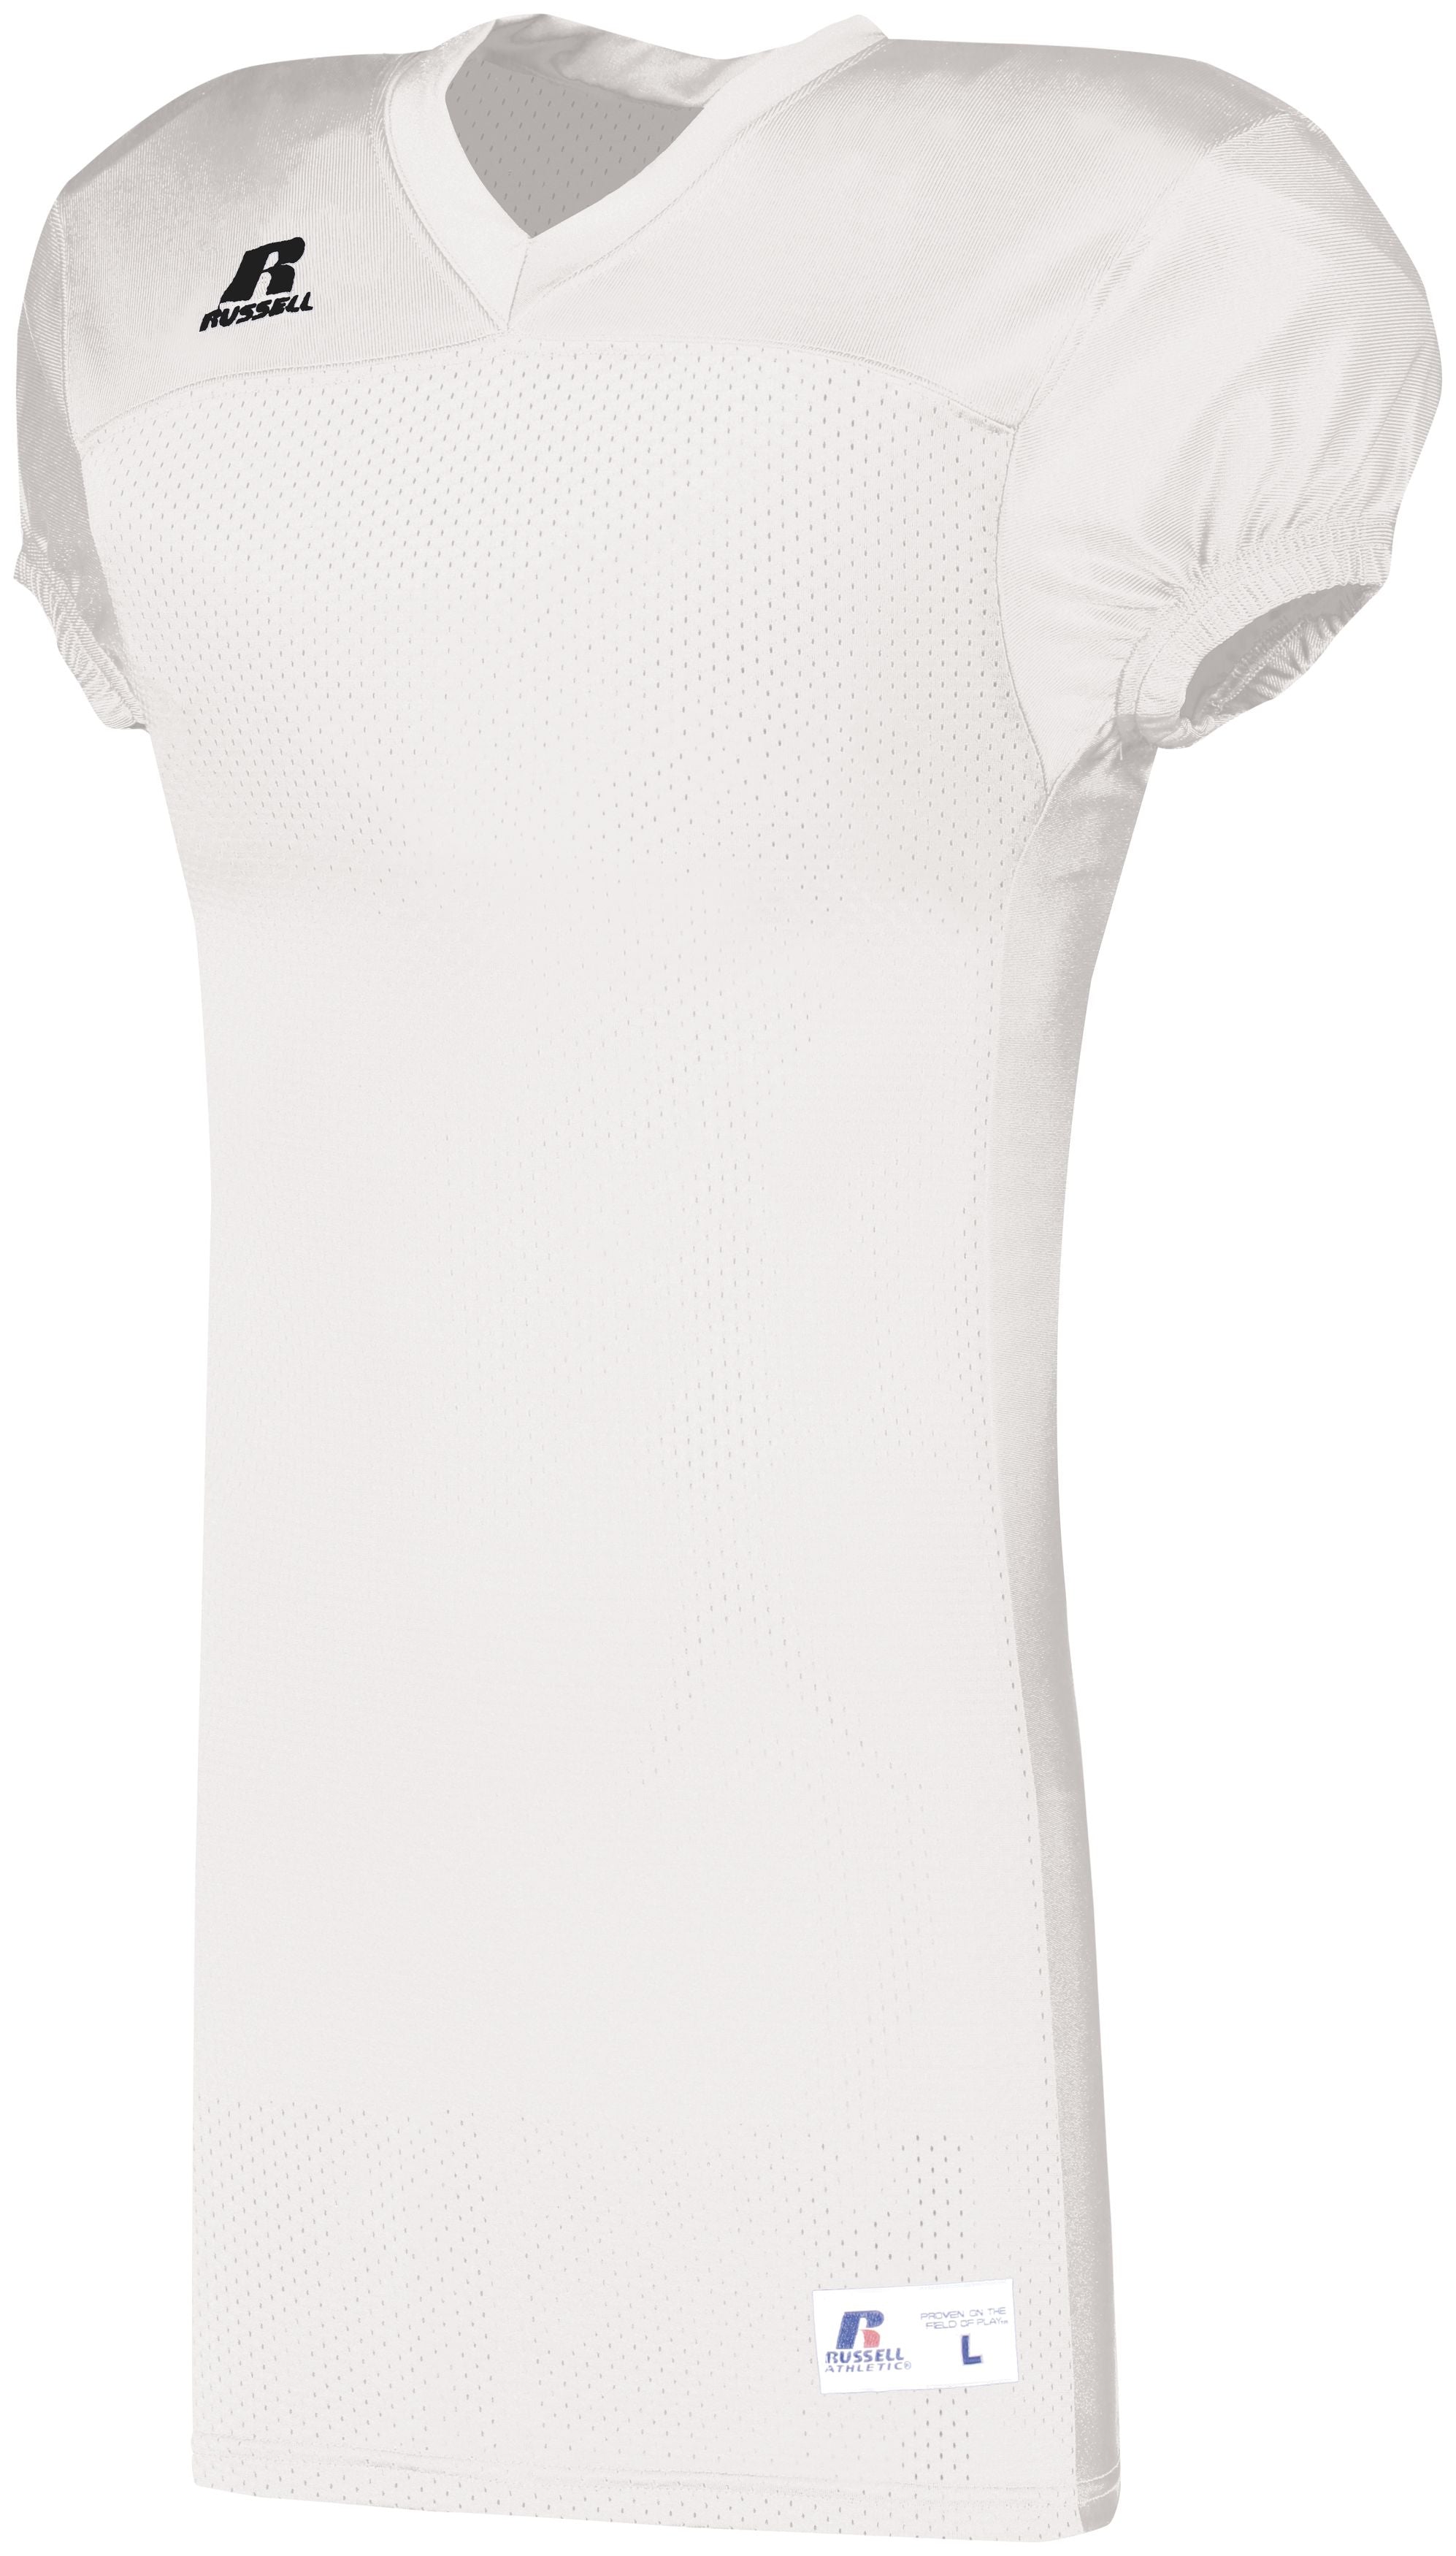 Russell Athletic Solid Jersey With Side Inserts in White  -Part of the Adult, Adult-Jersey, Football, Russell-Athletic-Products, Shirts, All-Sports, All-Sports-1 product lines at KanaleyCreations.com